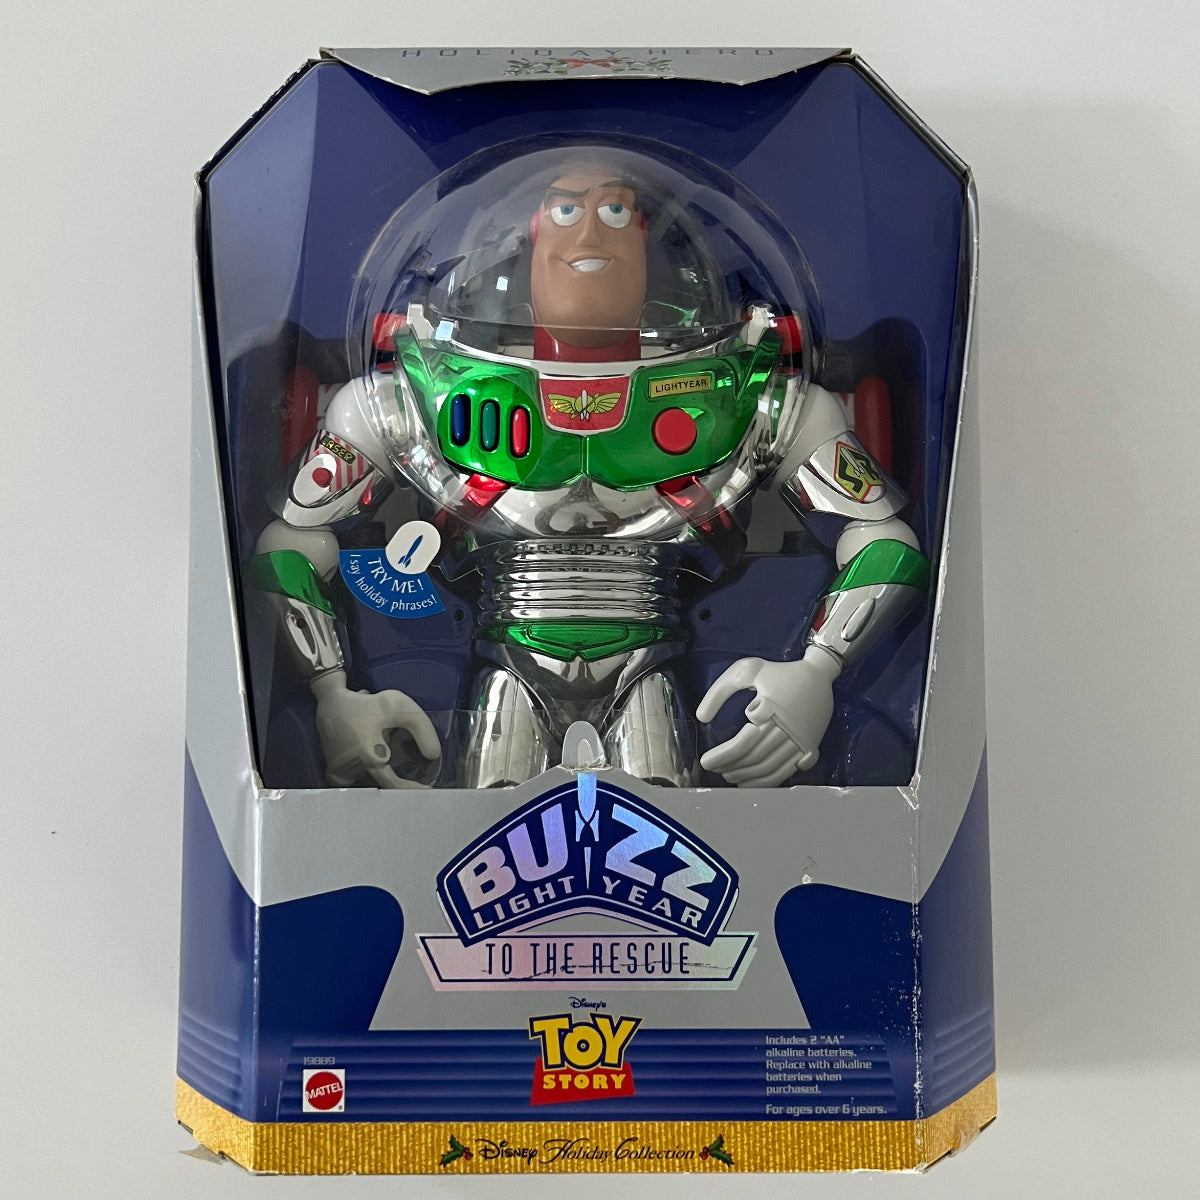 Vintage 1998 Buzz Lightyear special Christmas edition Action Figure New in Box